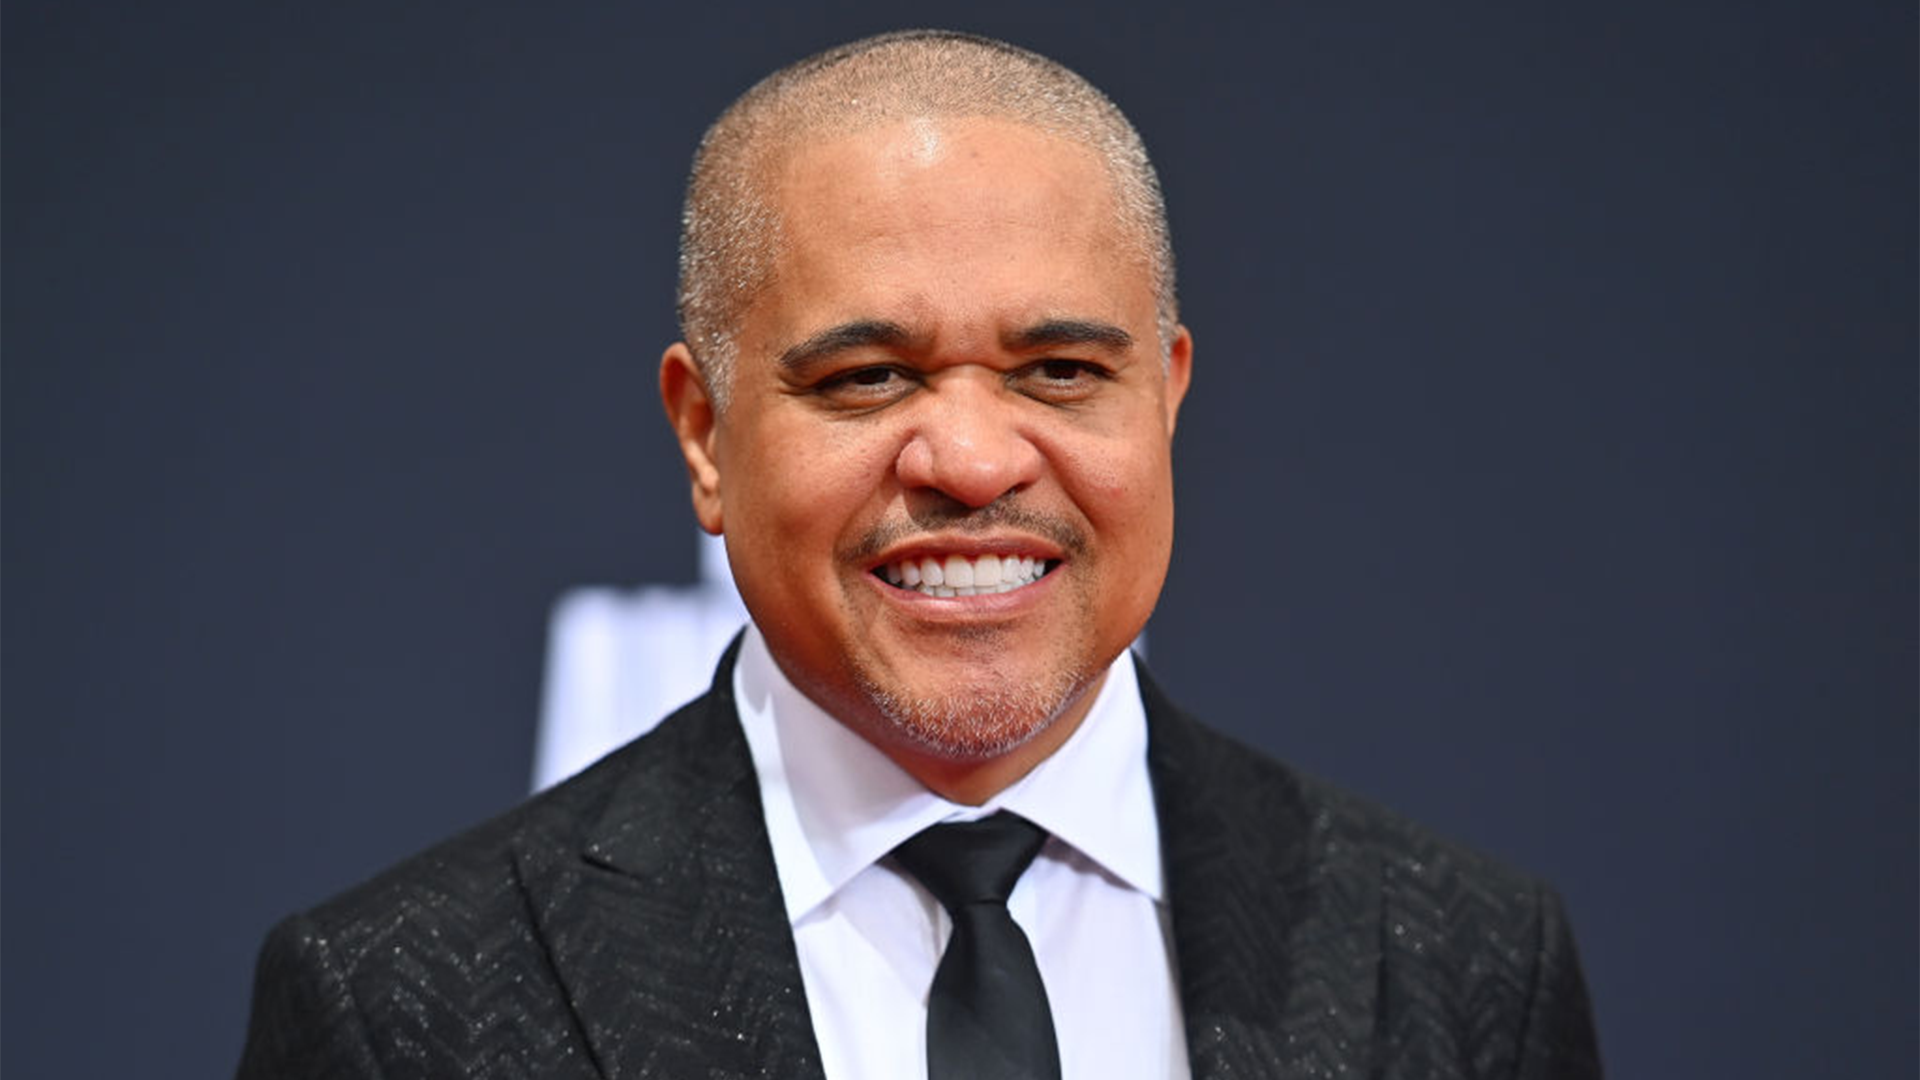 Irv Gotti Explains Why He Reportedly Sold His Masters As A Part Of A Deal Worth $300M  — ‘I Sold My Past To Ignite My Future’